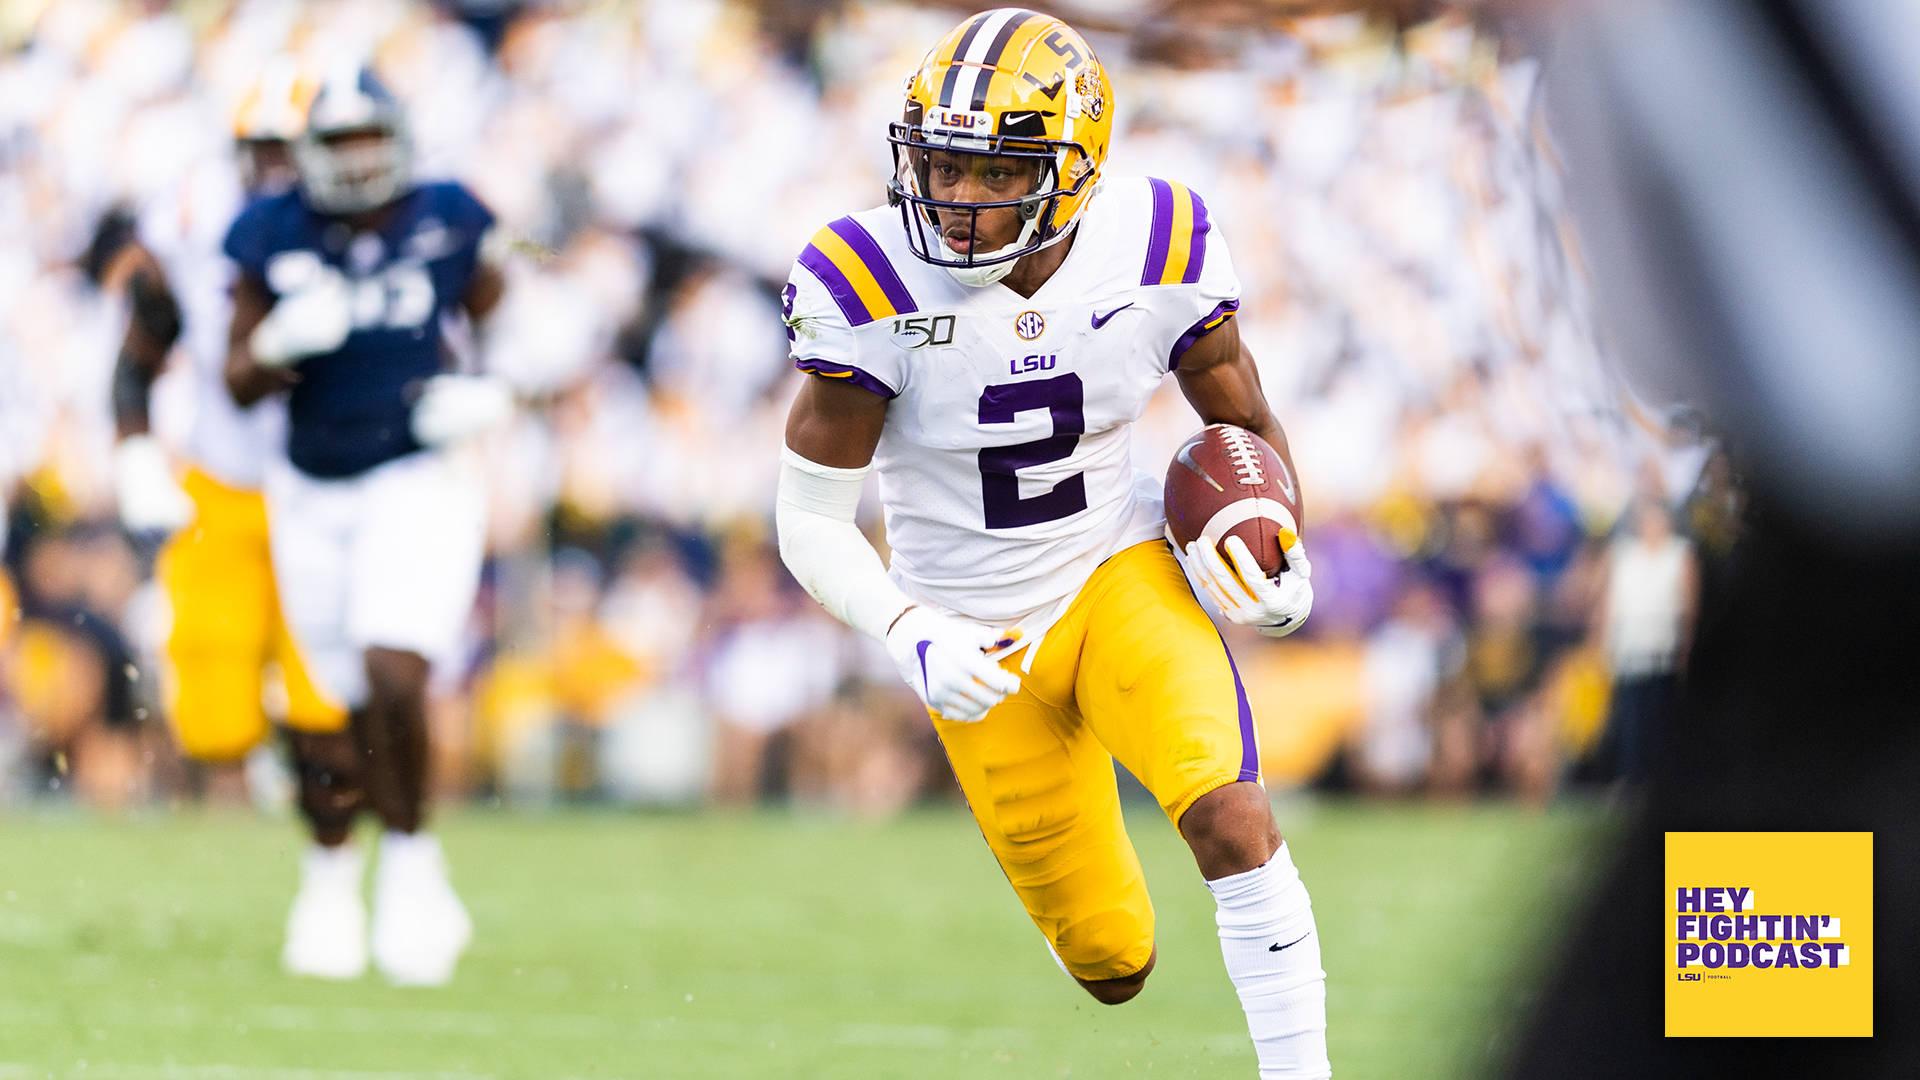 HFP: Justin Jefferson on Living Out His Dreams at LSU